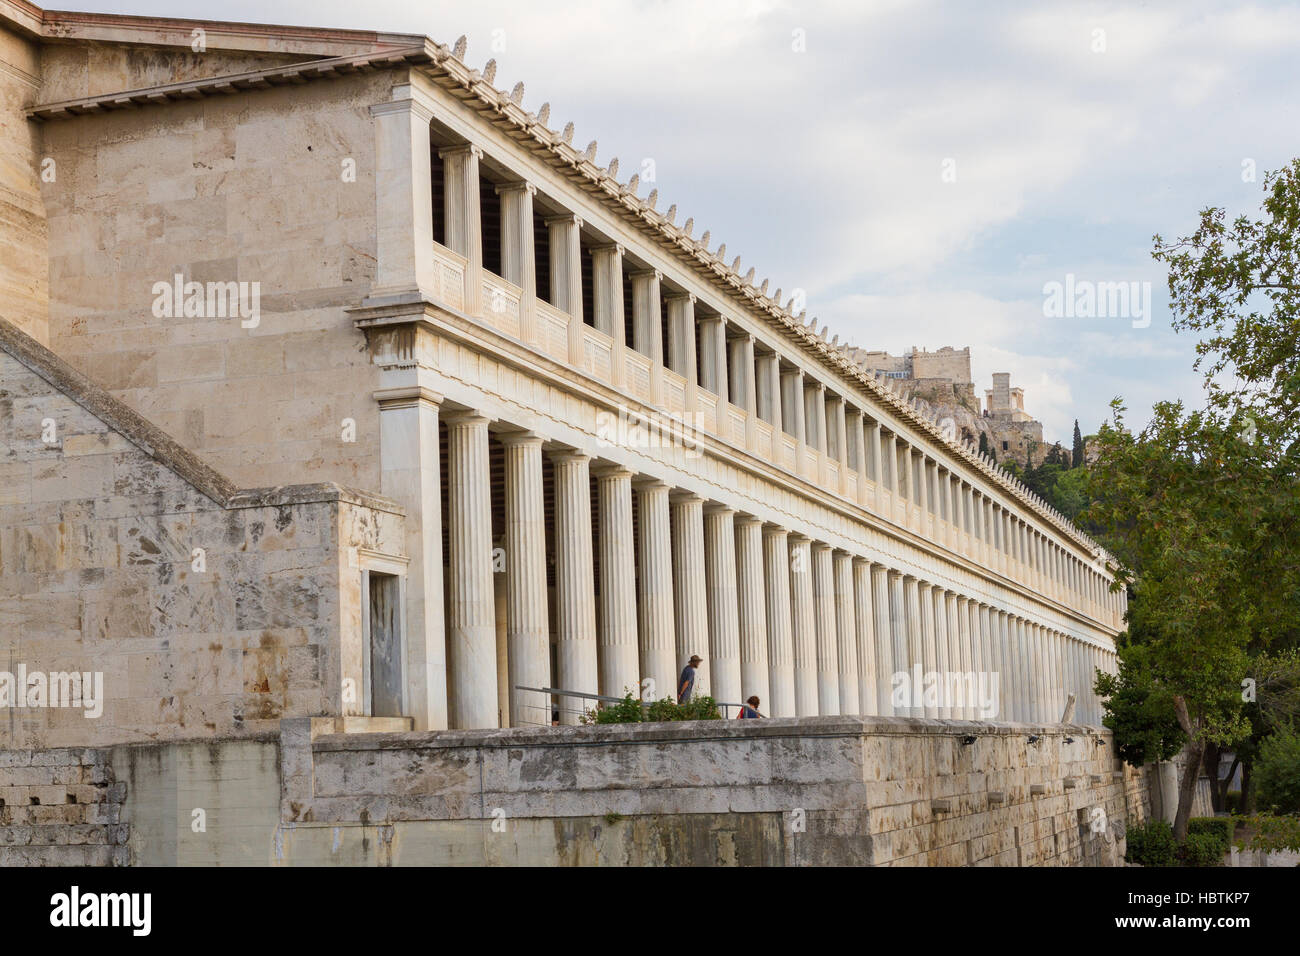 Athens, Greece - August 25, 2016: Stoa of Attalos in Athens, Greece on a summer afternoon Stock Photo